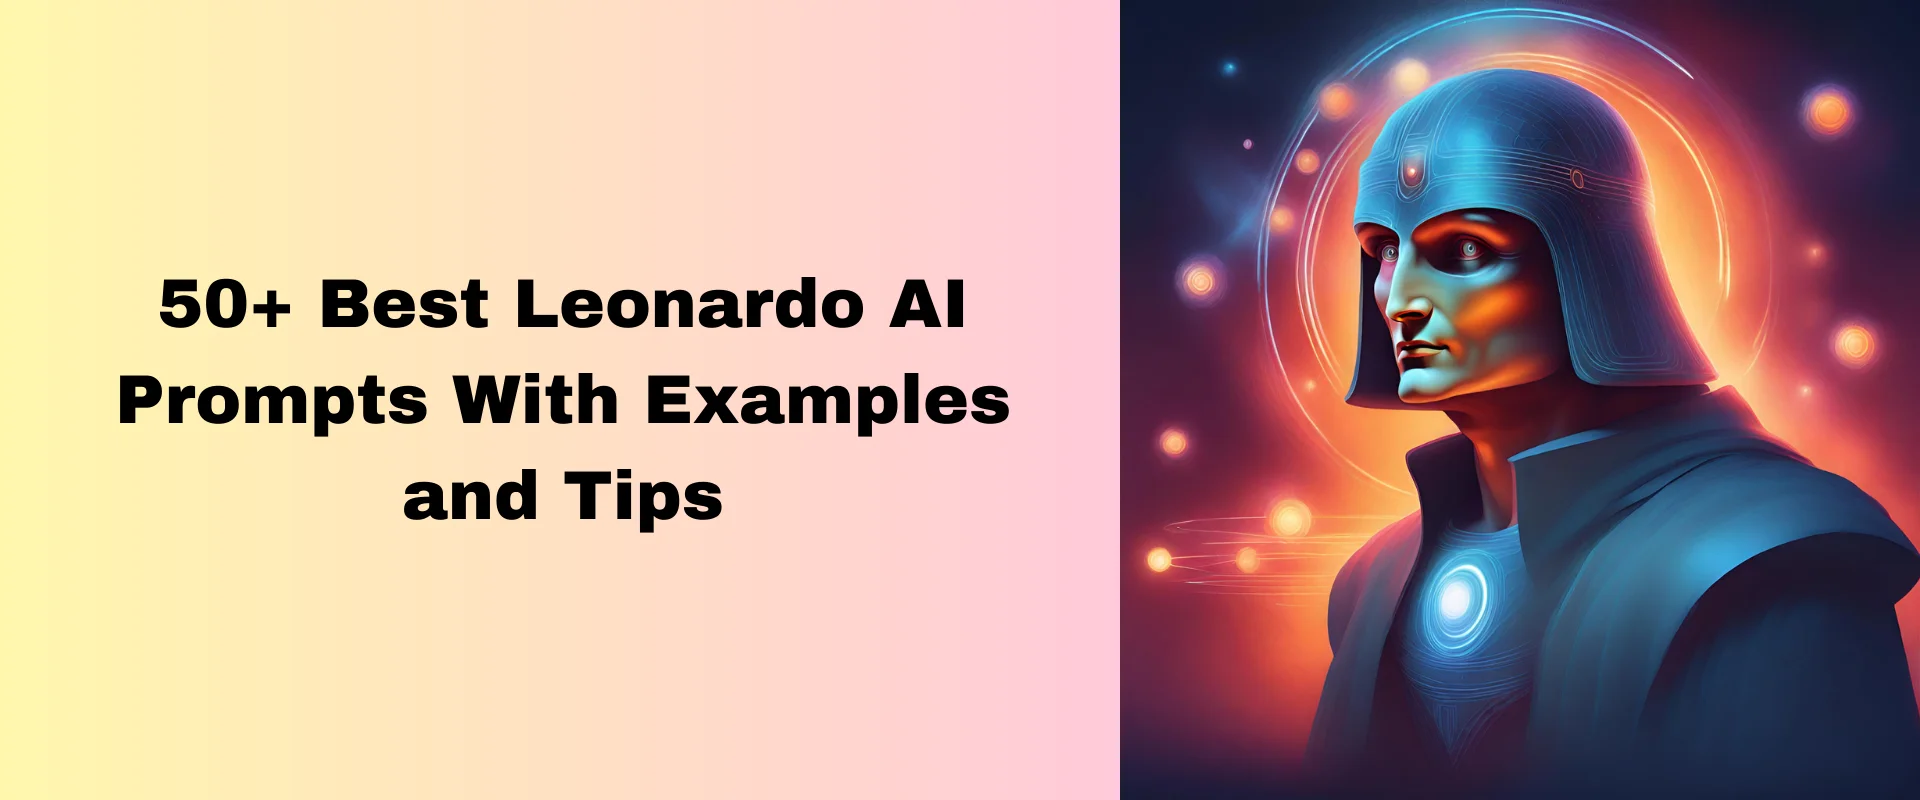 50+ Best Leonardo AI Prompts With Examples and Tips